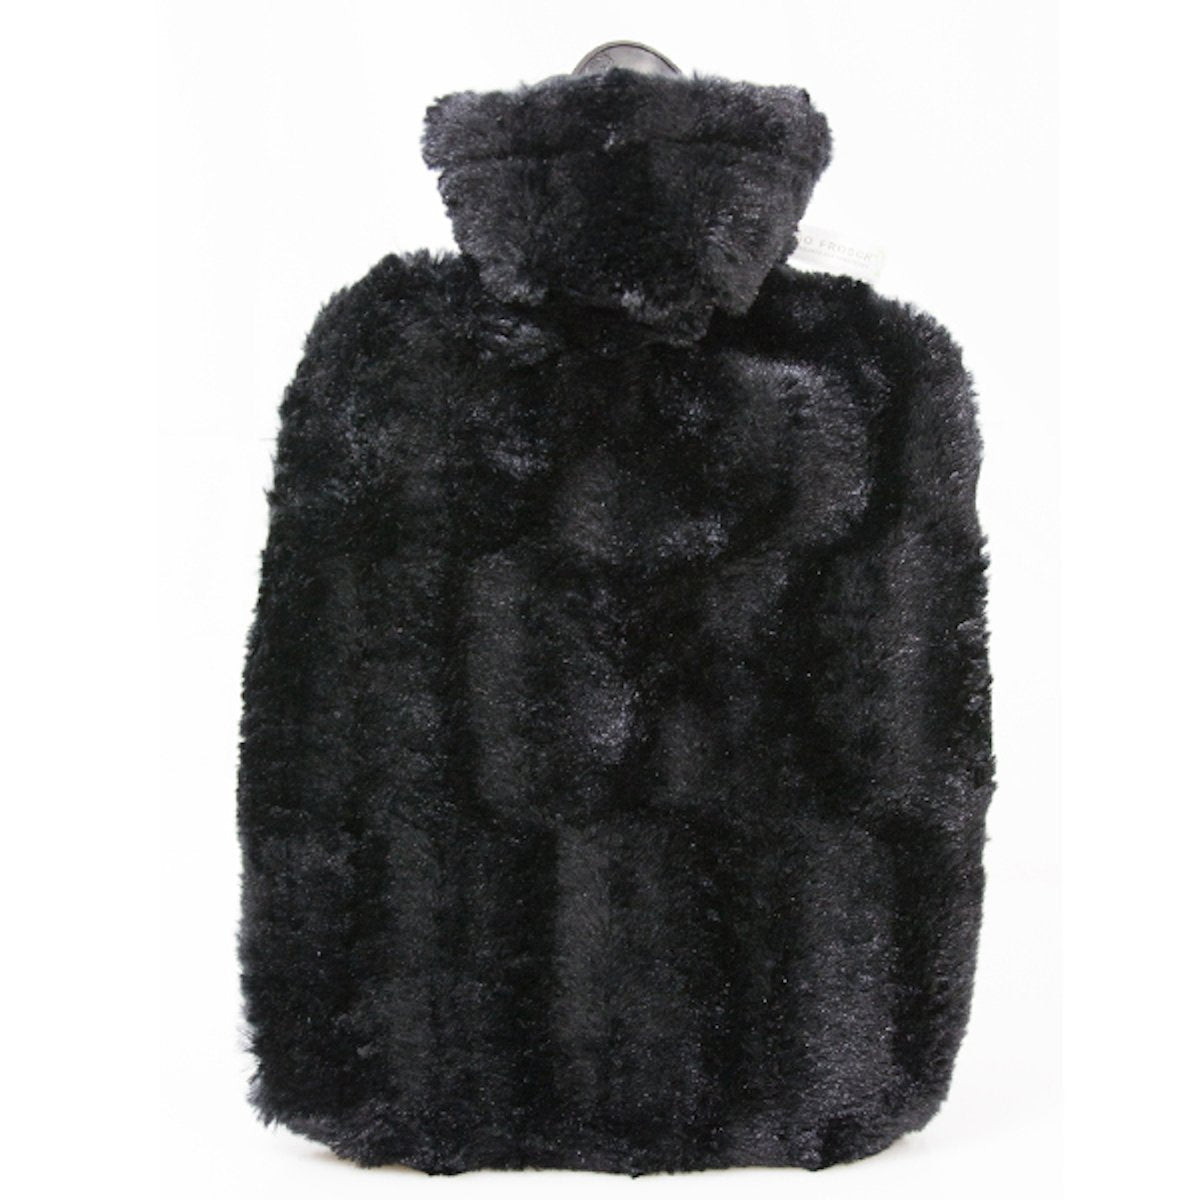 Hot Water Bottle Classic with Cover Faux Fur, Black